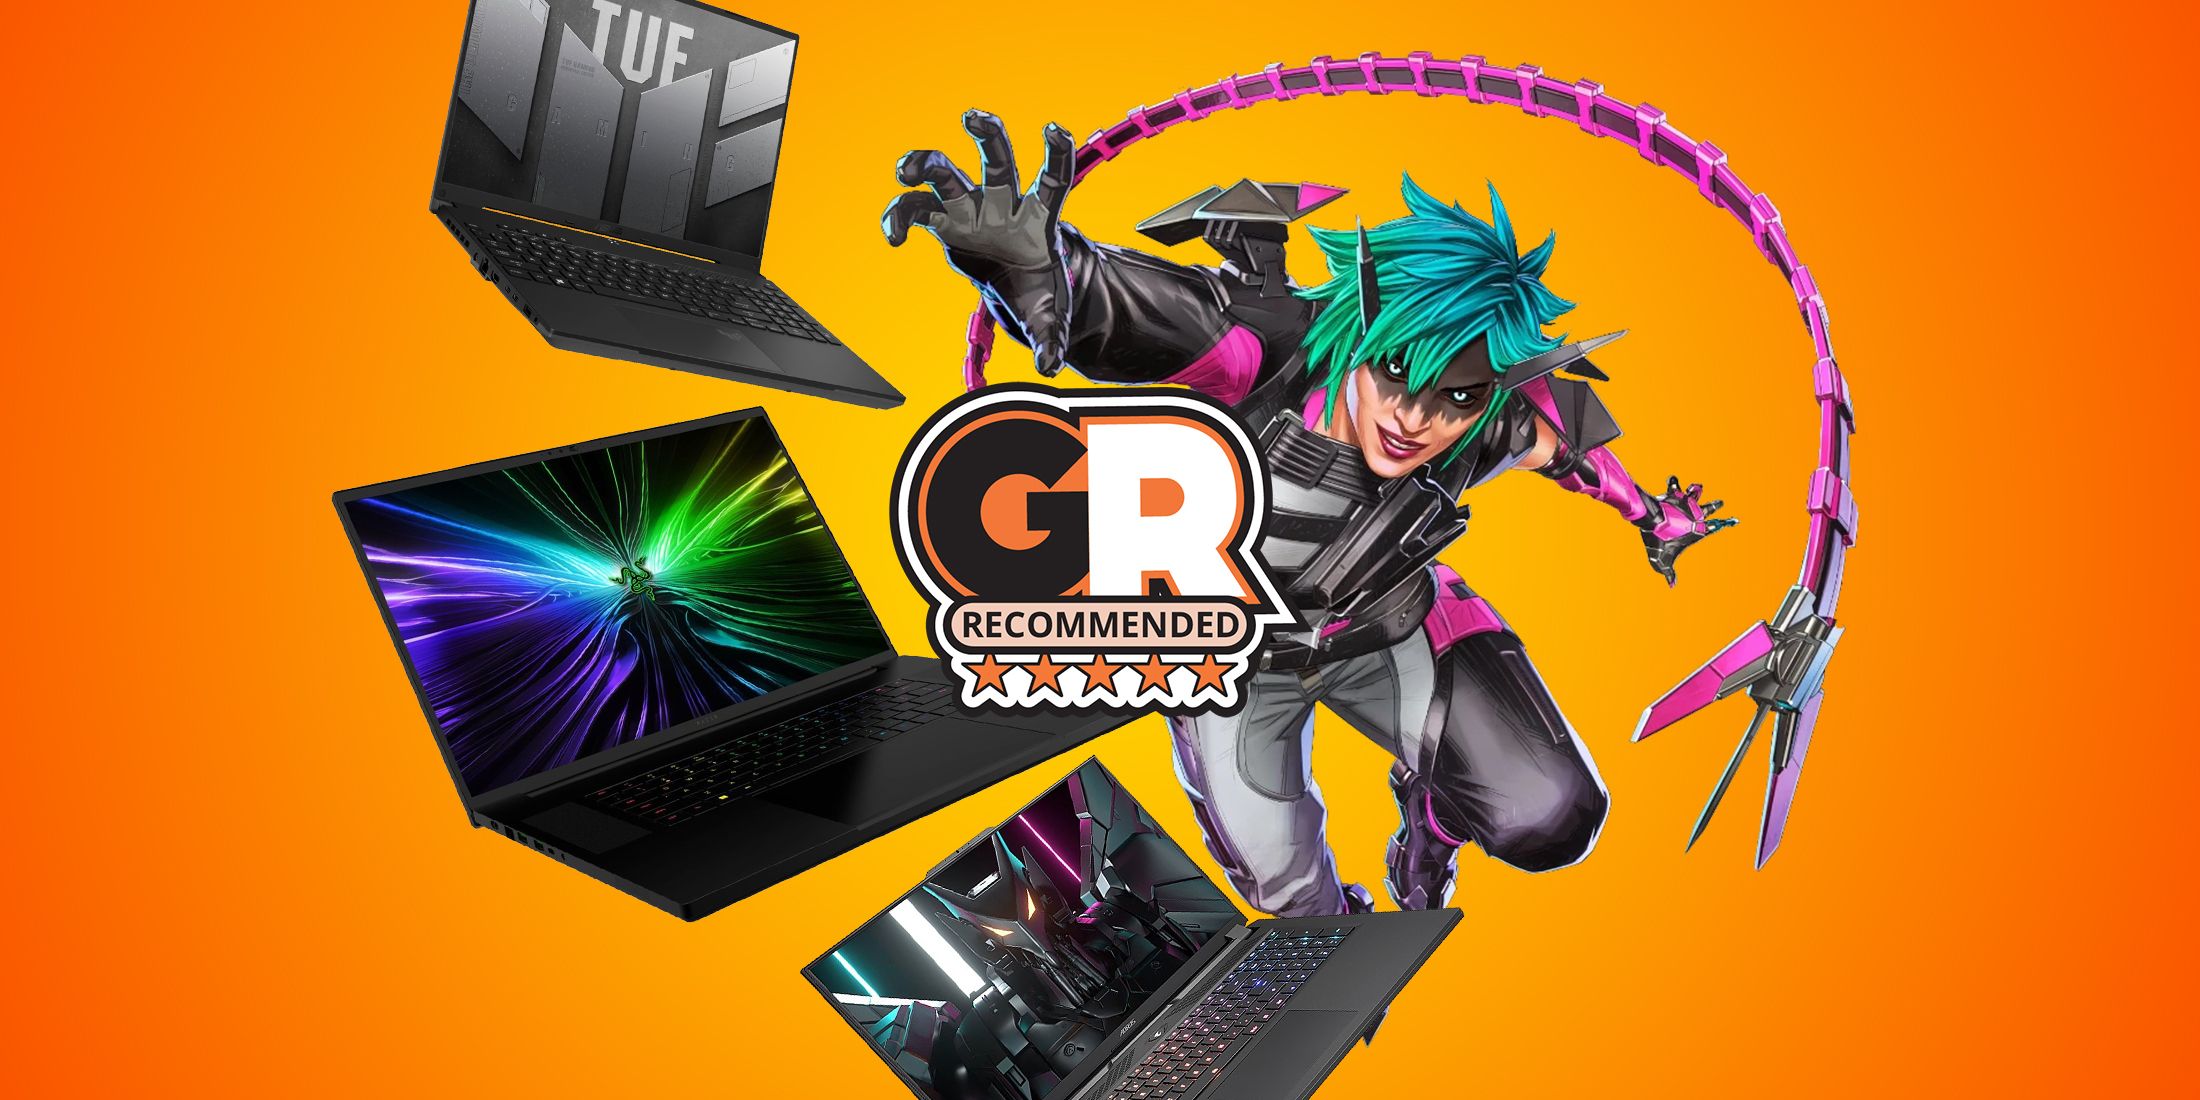 The Best Gaming Laptops To Compete With An Edge In Apex Legends